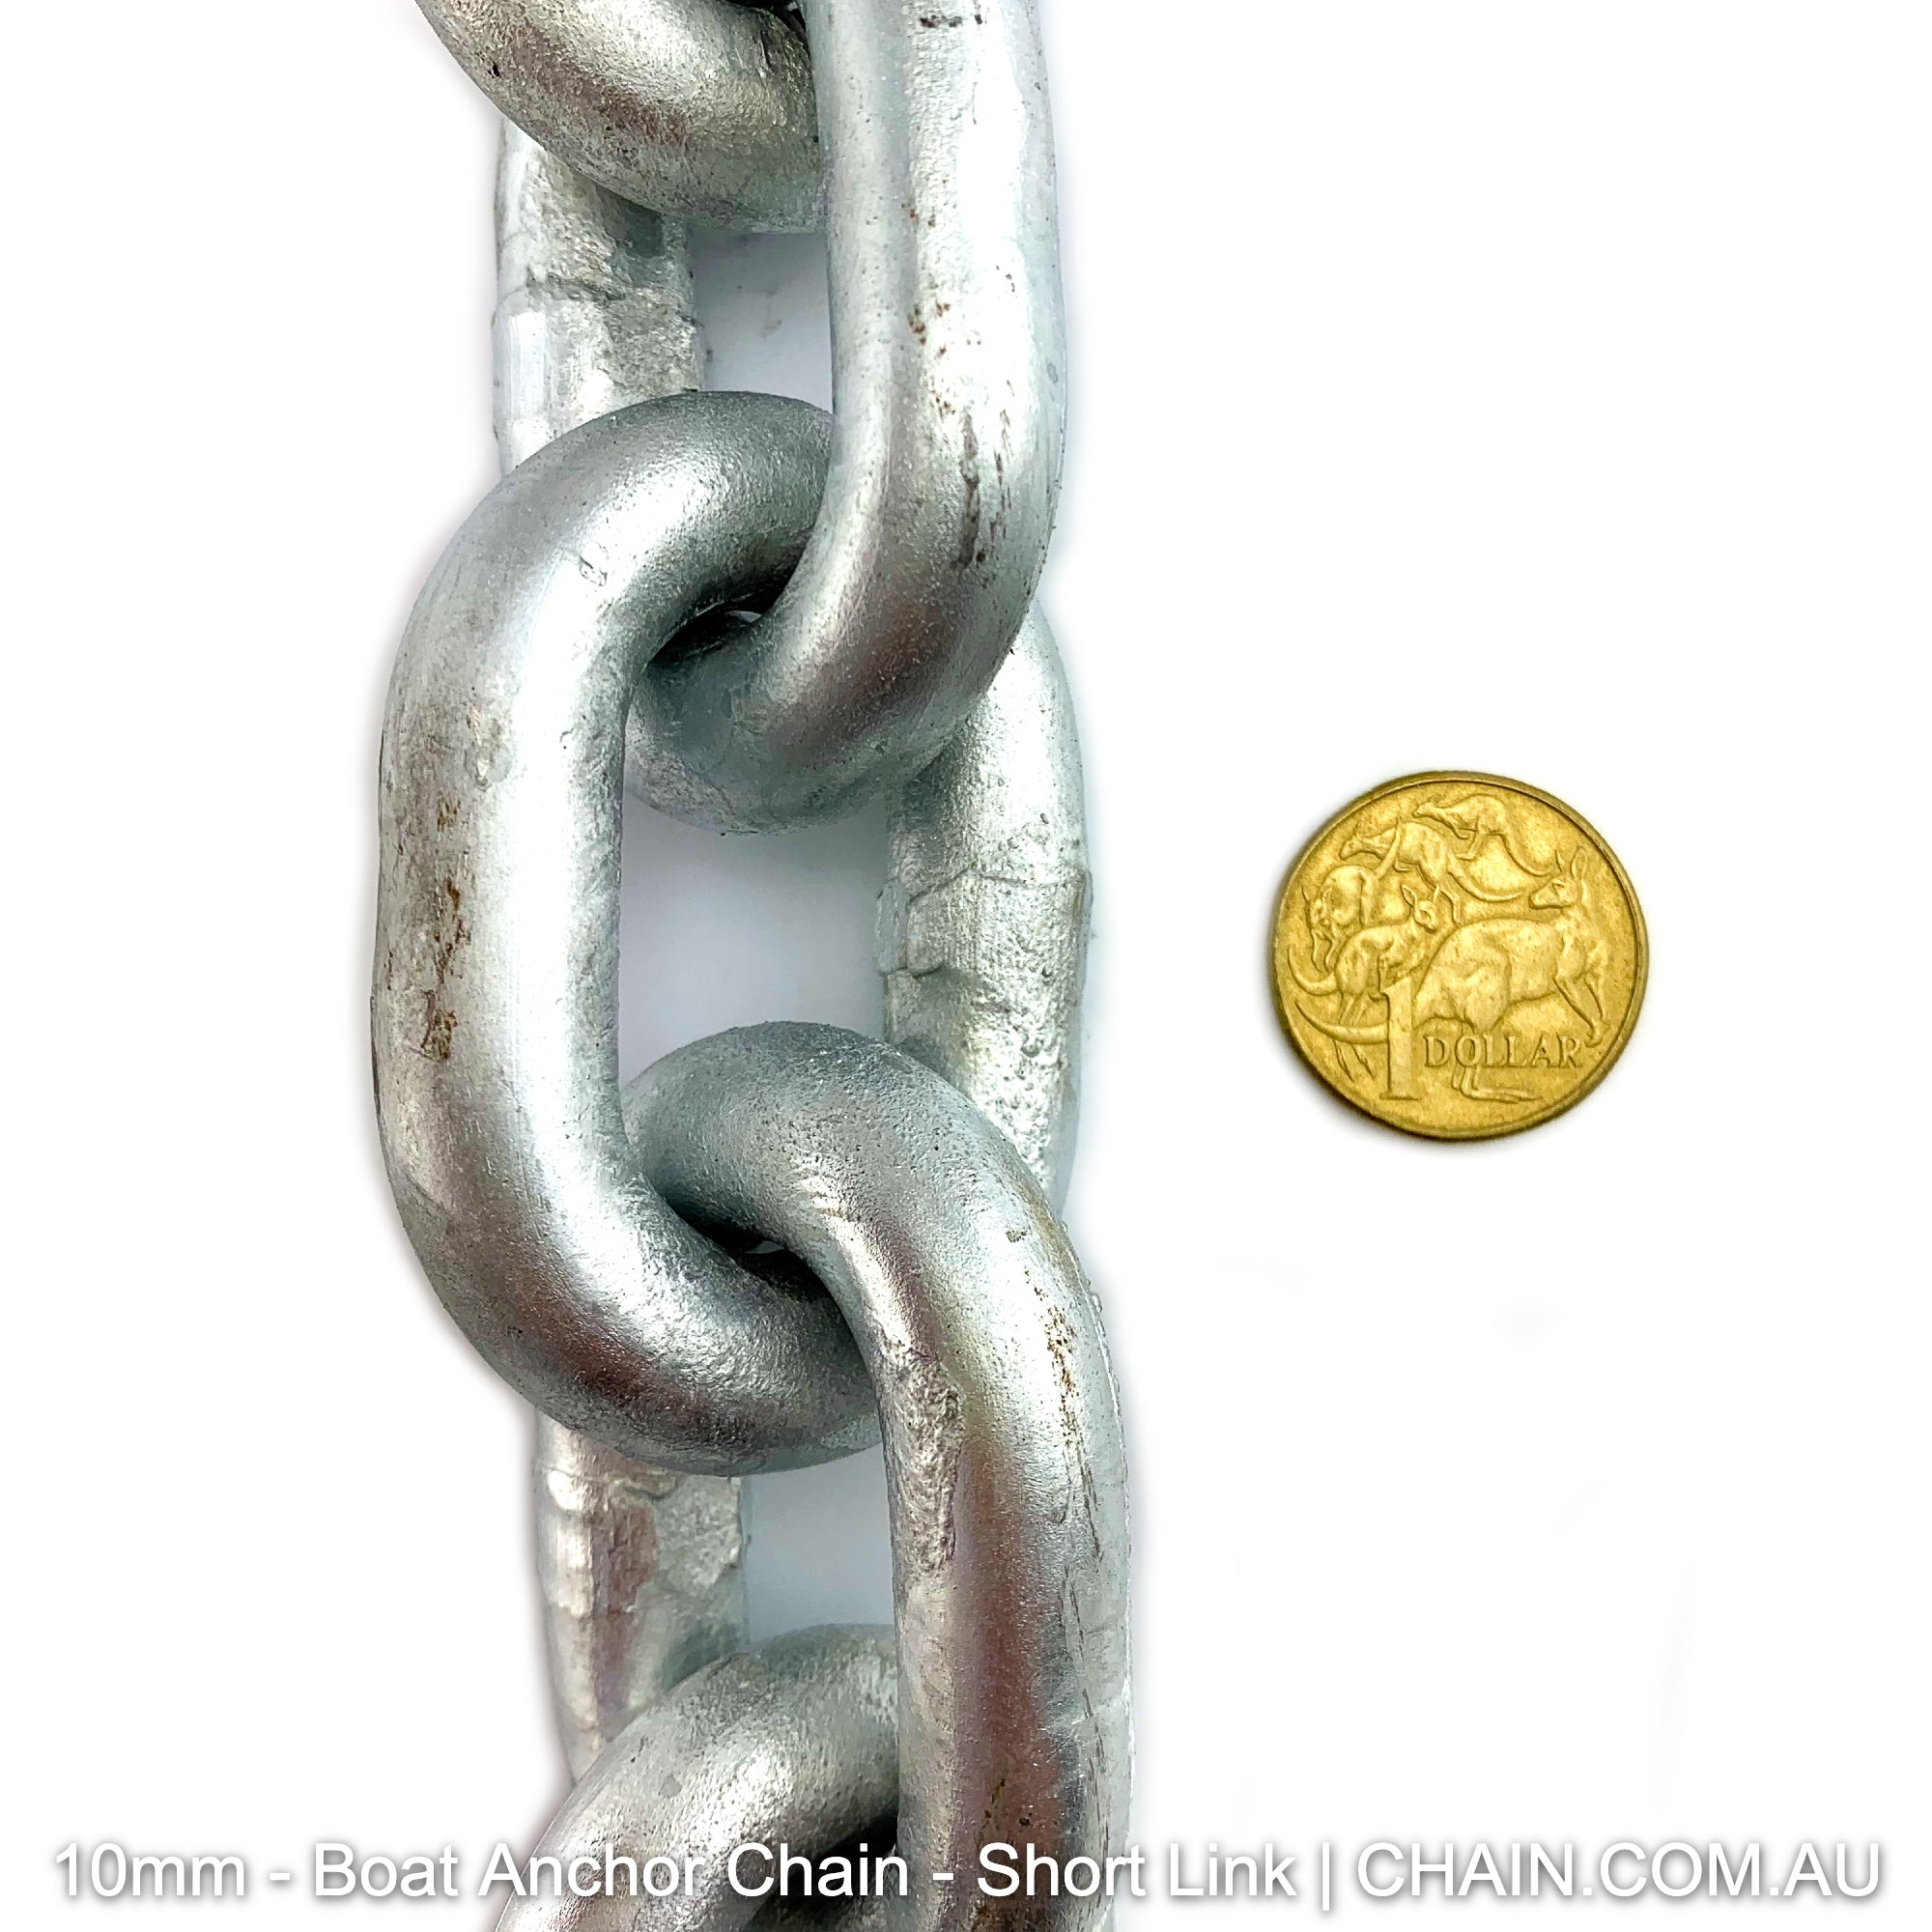 Boat anchor chain, size 10mm short link, galvanised. By the metre or bulk buy 25kg buckets. Shipping Australia wide. Shop online chain.com.au